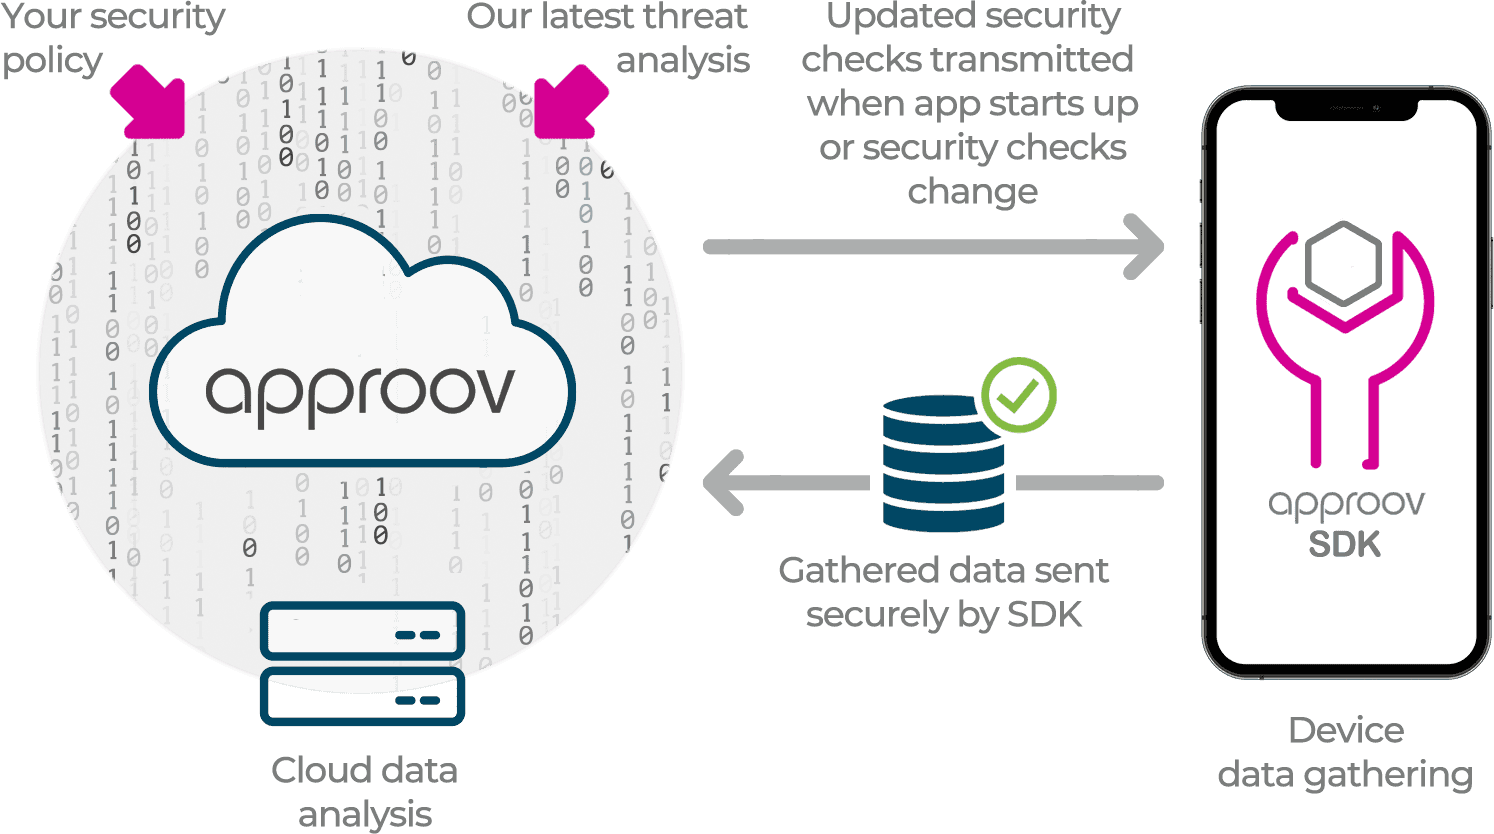 Approov security policy diagram; instant over-the-air updates enabled